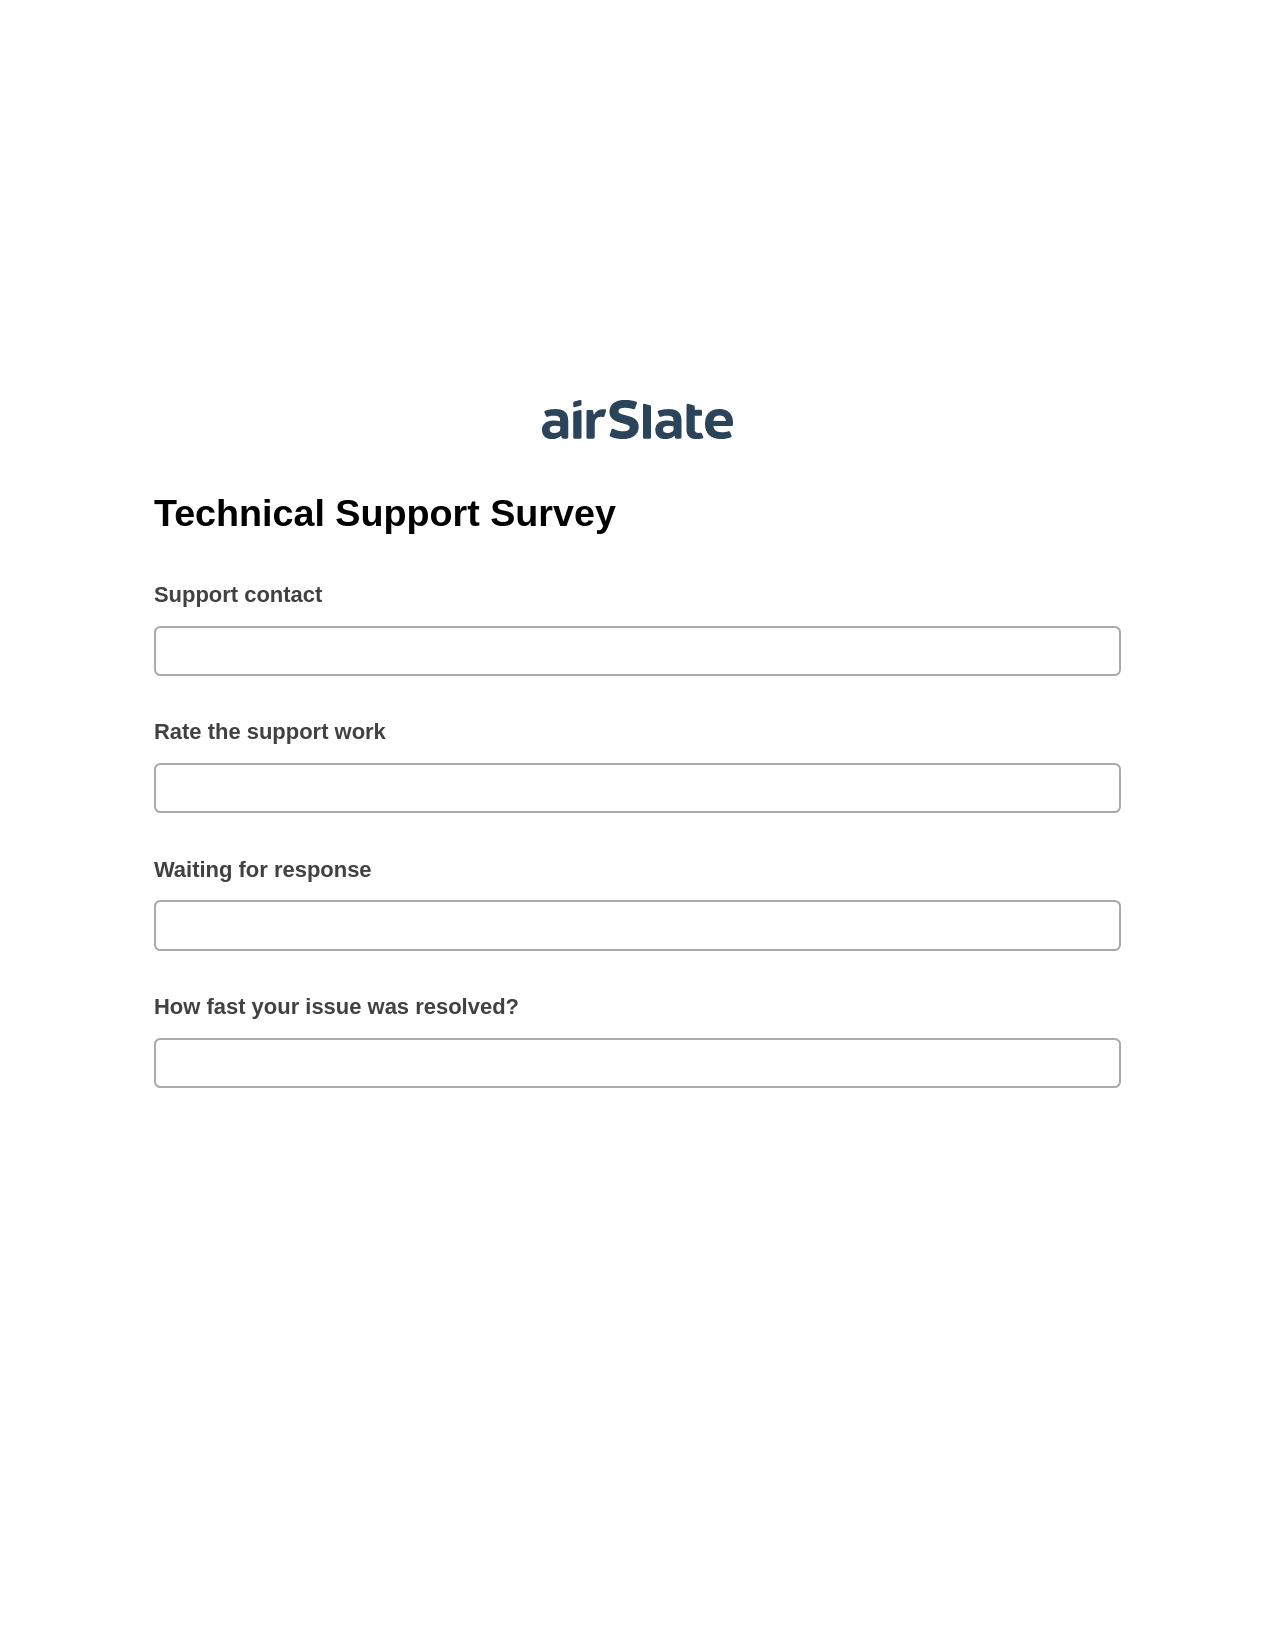 Technical Support Survey Pre-fill from CSV File Bot, SendGrid send Campaign bot, Export to Salesforce Record Bot